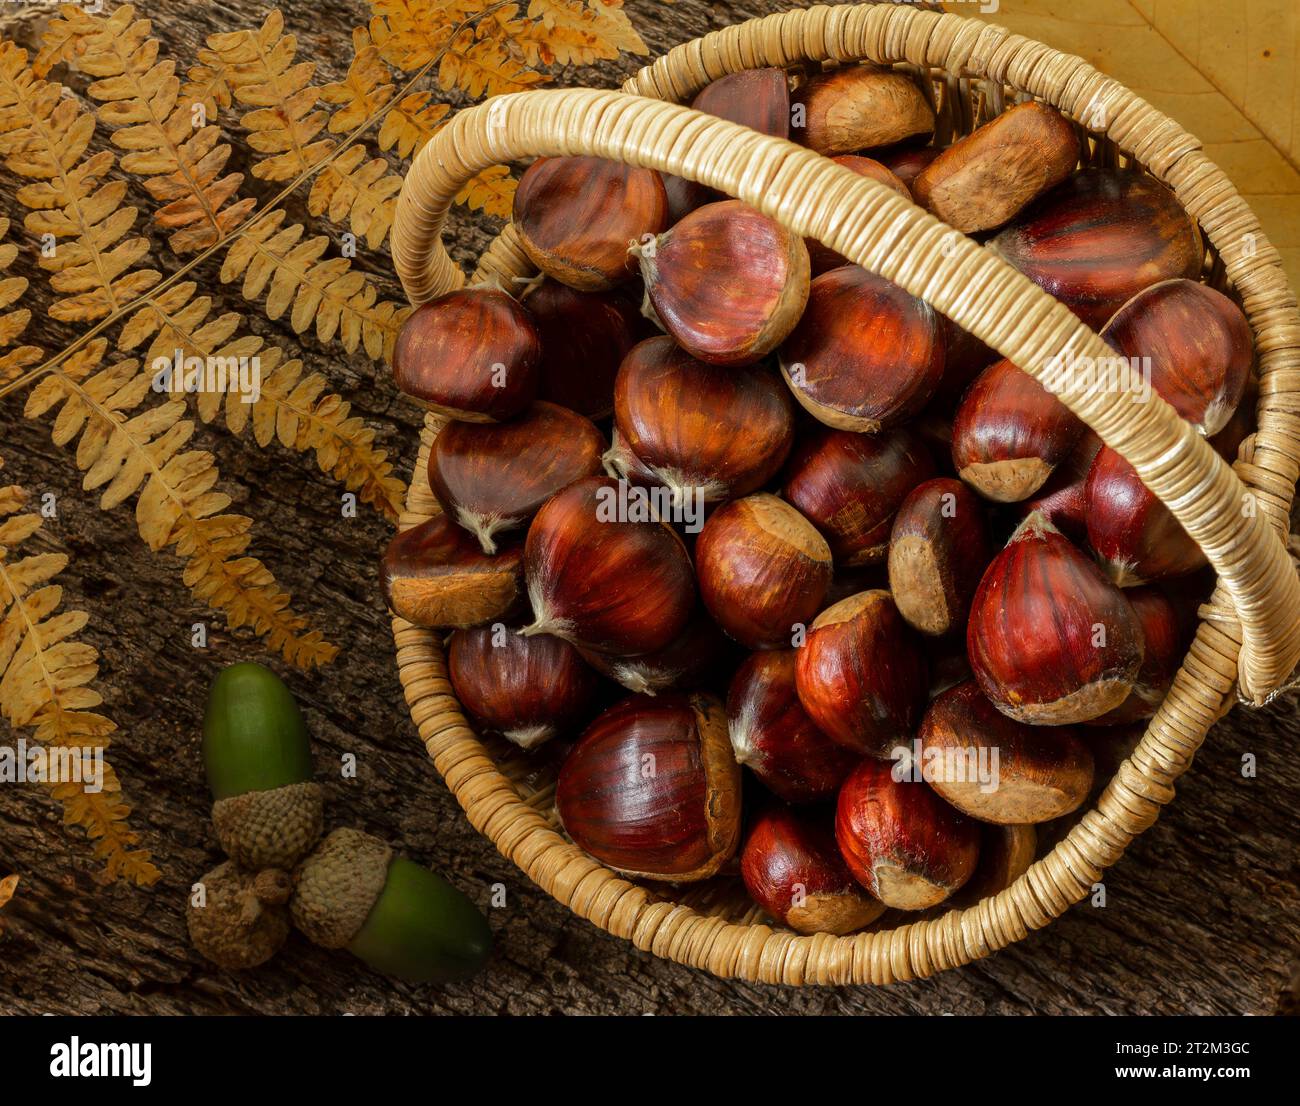 A basket full of newly collected chestnuts Stock Photo